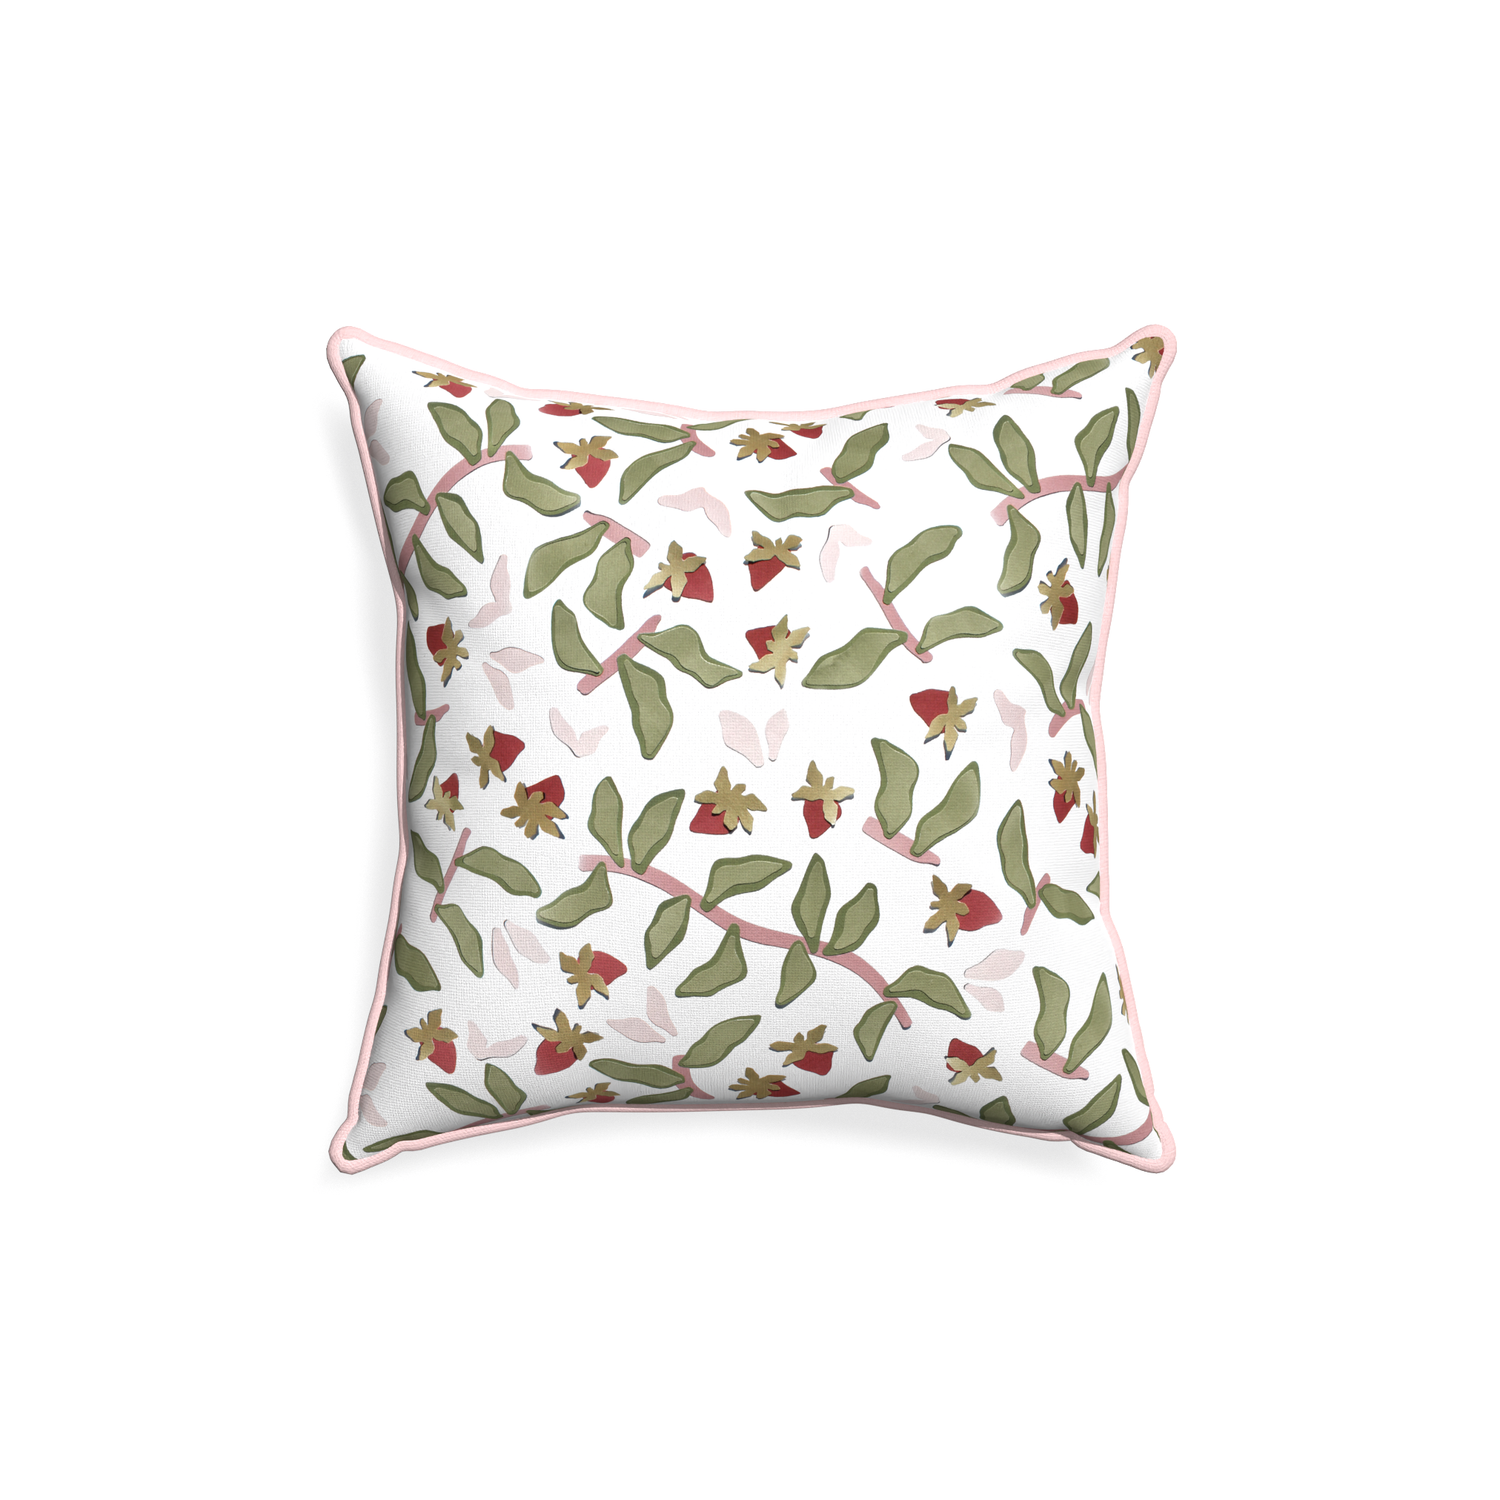 18-square nellie custom strawberry & botanicalpillow with petal piping on white background